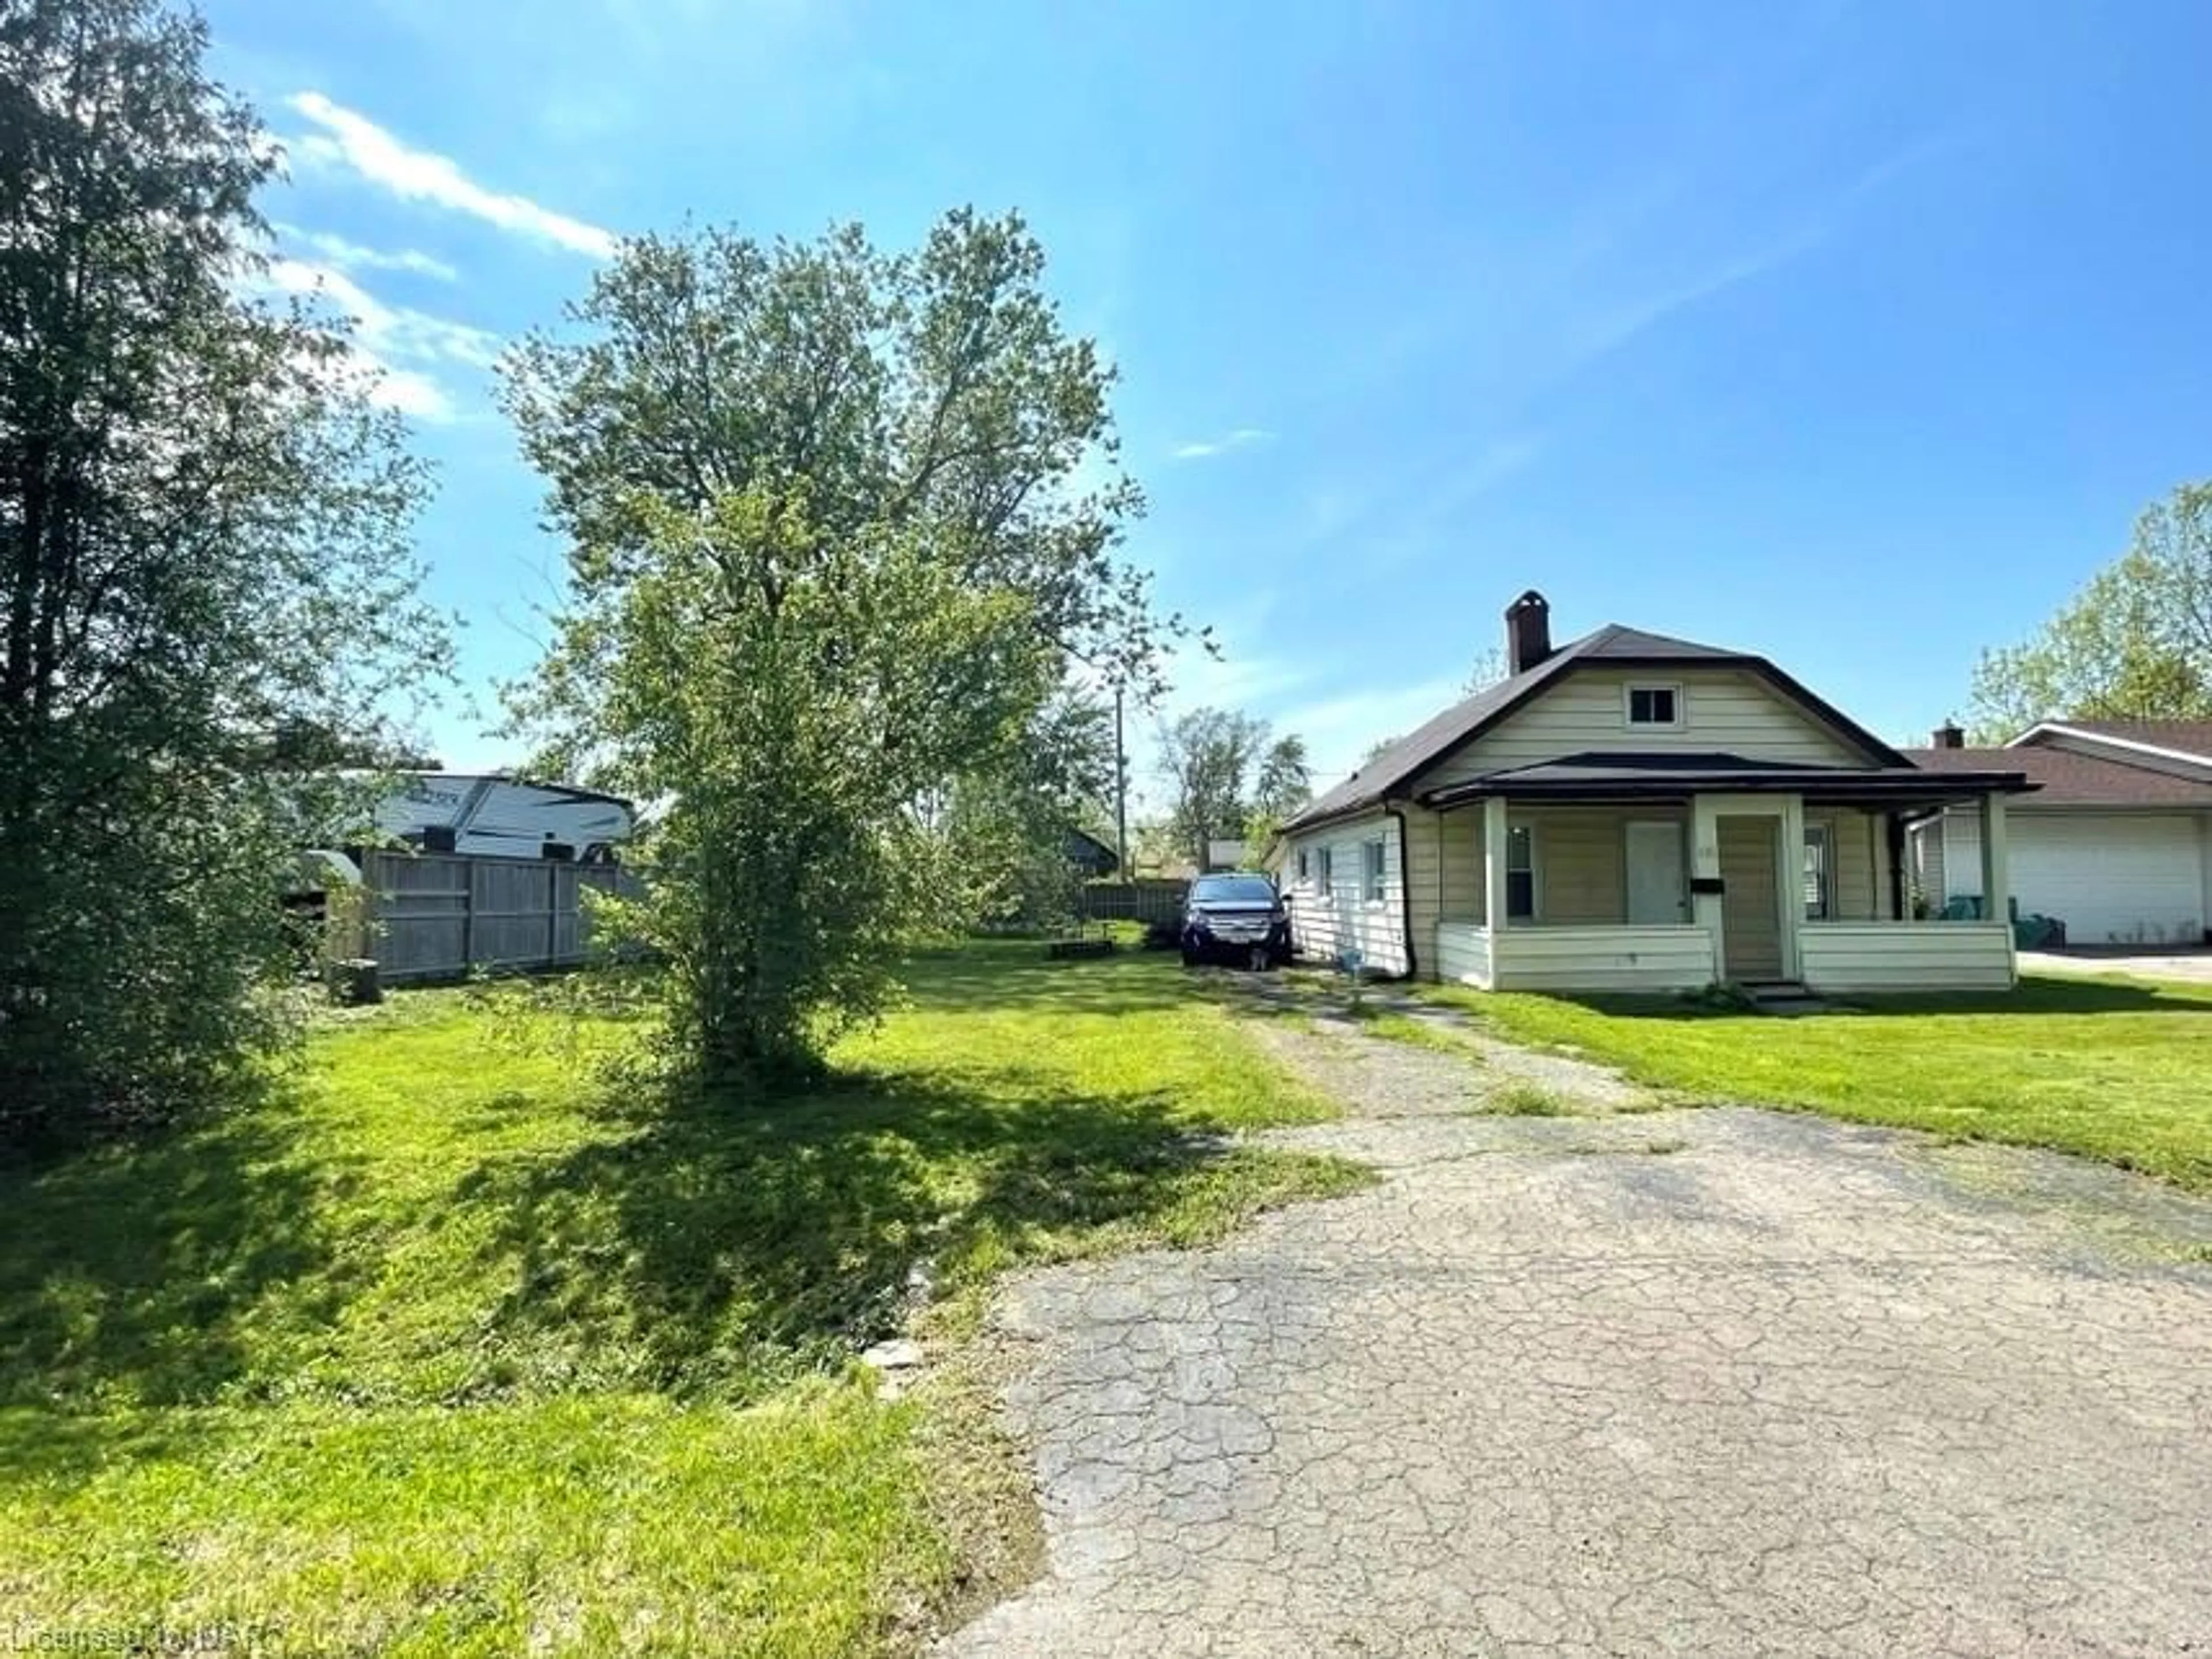 Cottage for 495 Grandview Rd, Fort Erie Ontario L2A 4T7